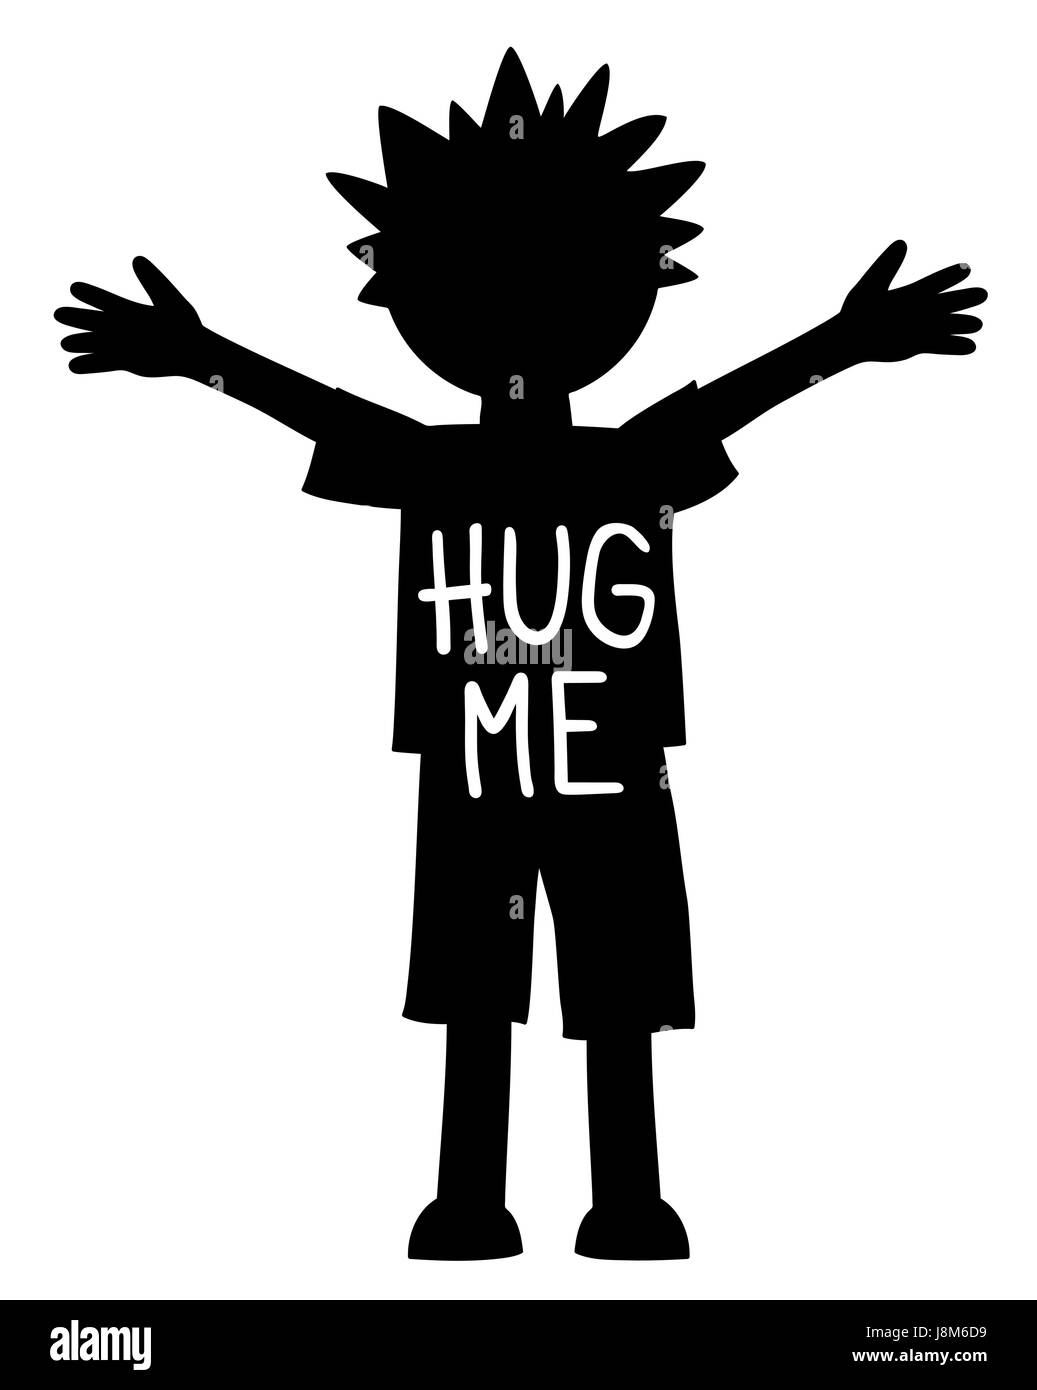 Hug me written on the young boy with open arms and hands, black and white vector Stock Vector